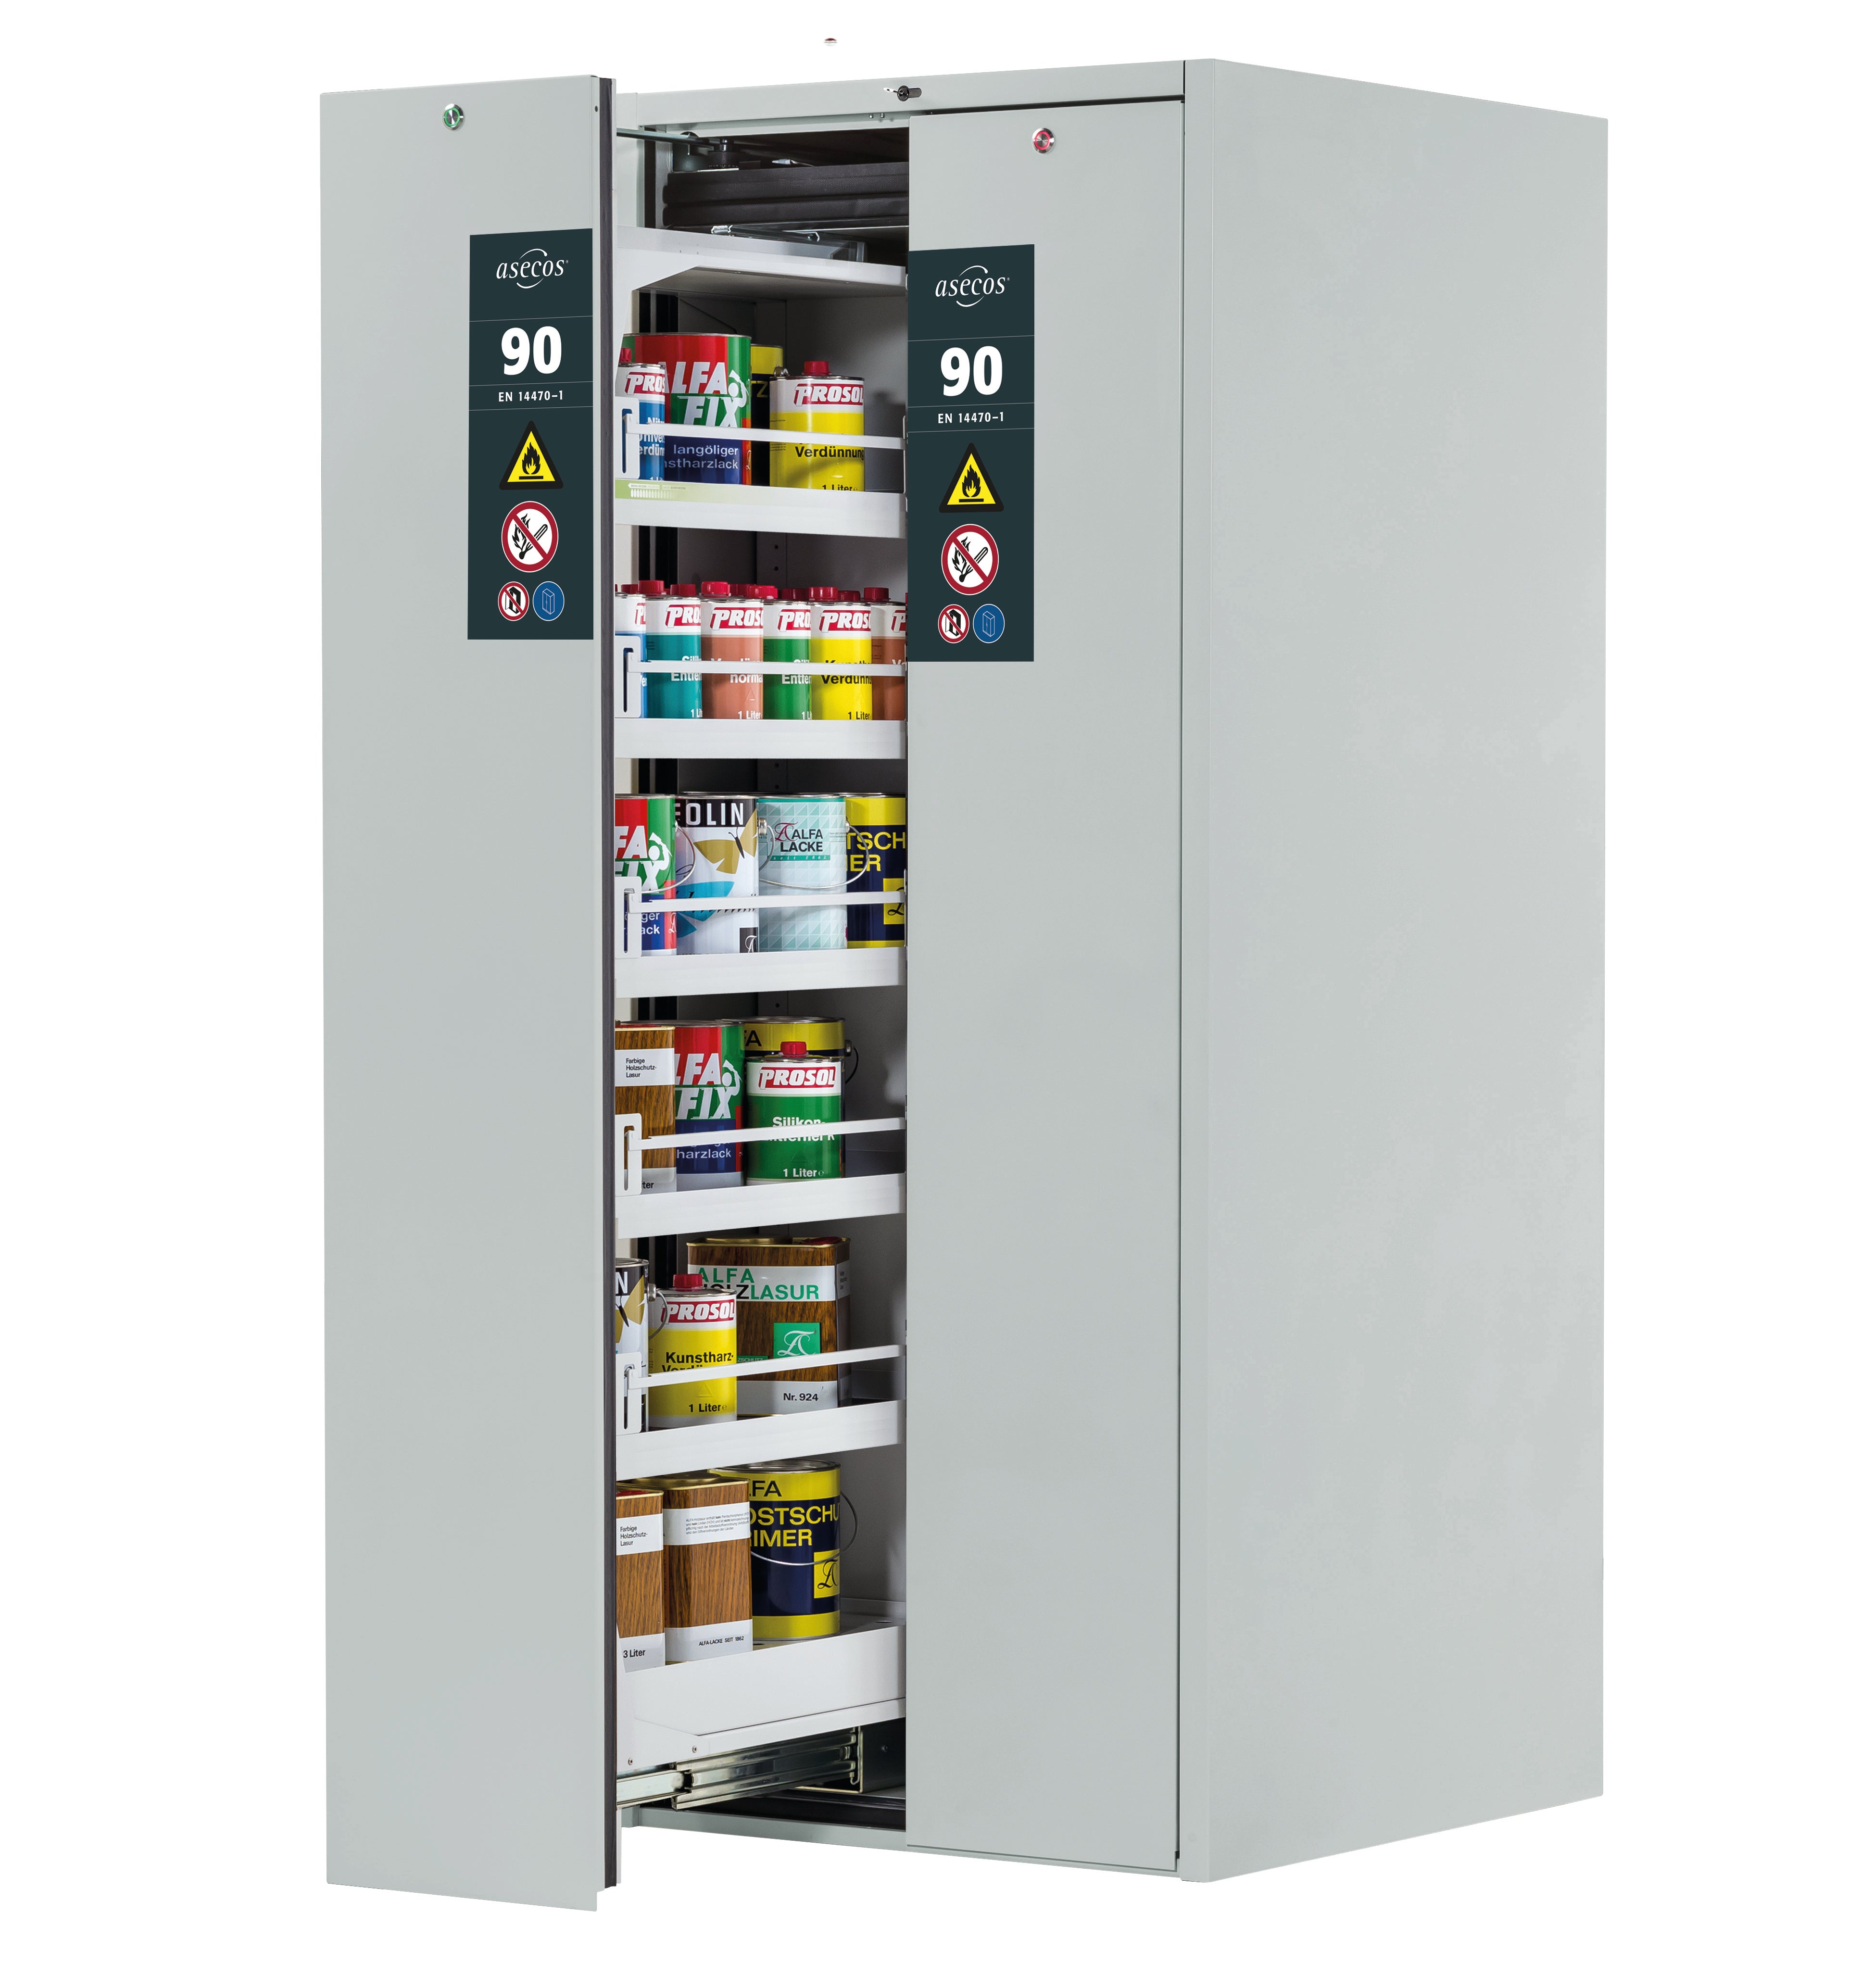 Type 90 safety cabinet V-MOVE-90 model V90.196.081.VDAC:0012 in light gray RAL 7035 with 5x standard tray base (sheet steel)